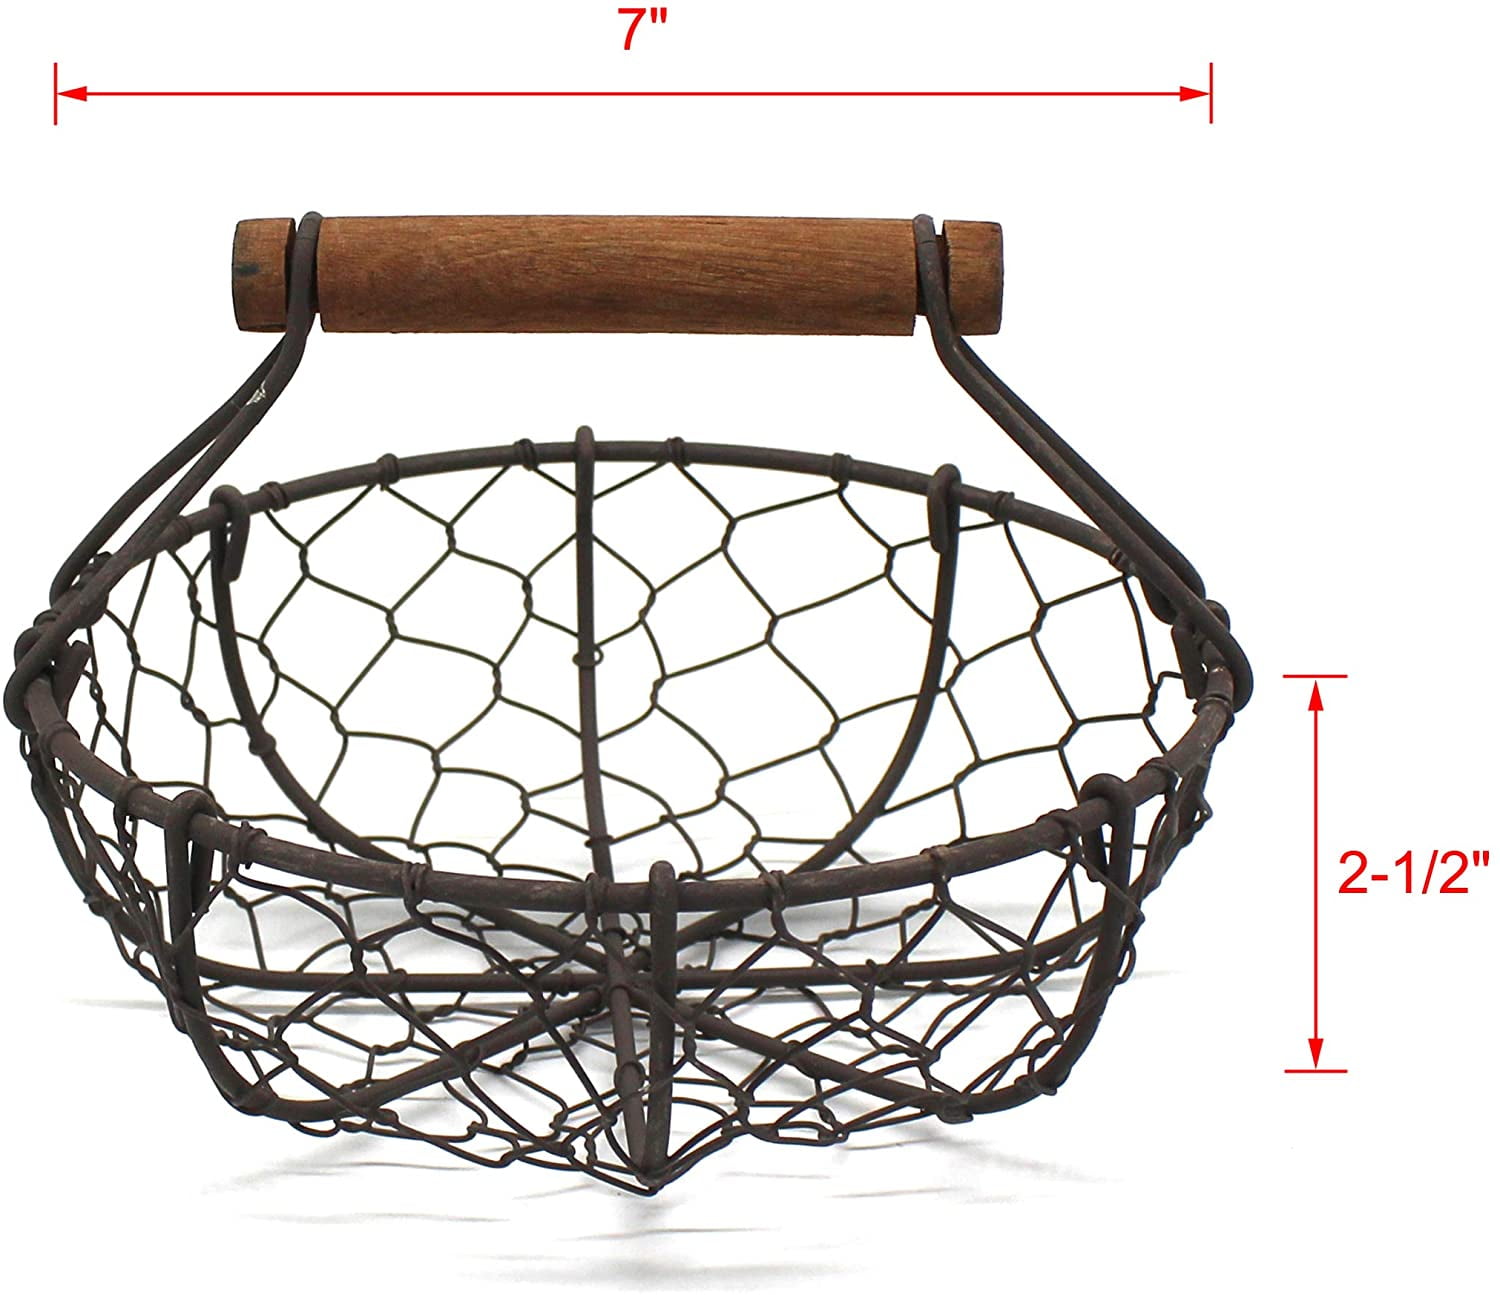 S/2 Oval Chicken Wire Egg Baskets Rust Gathering Baskets with Wooden Handle 